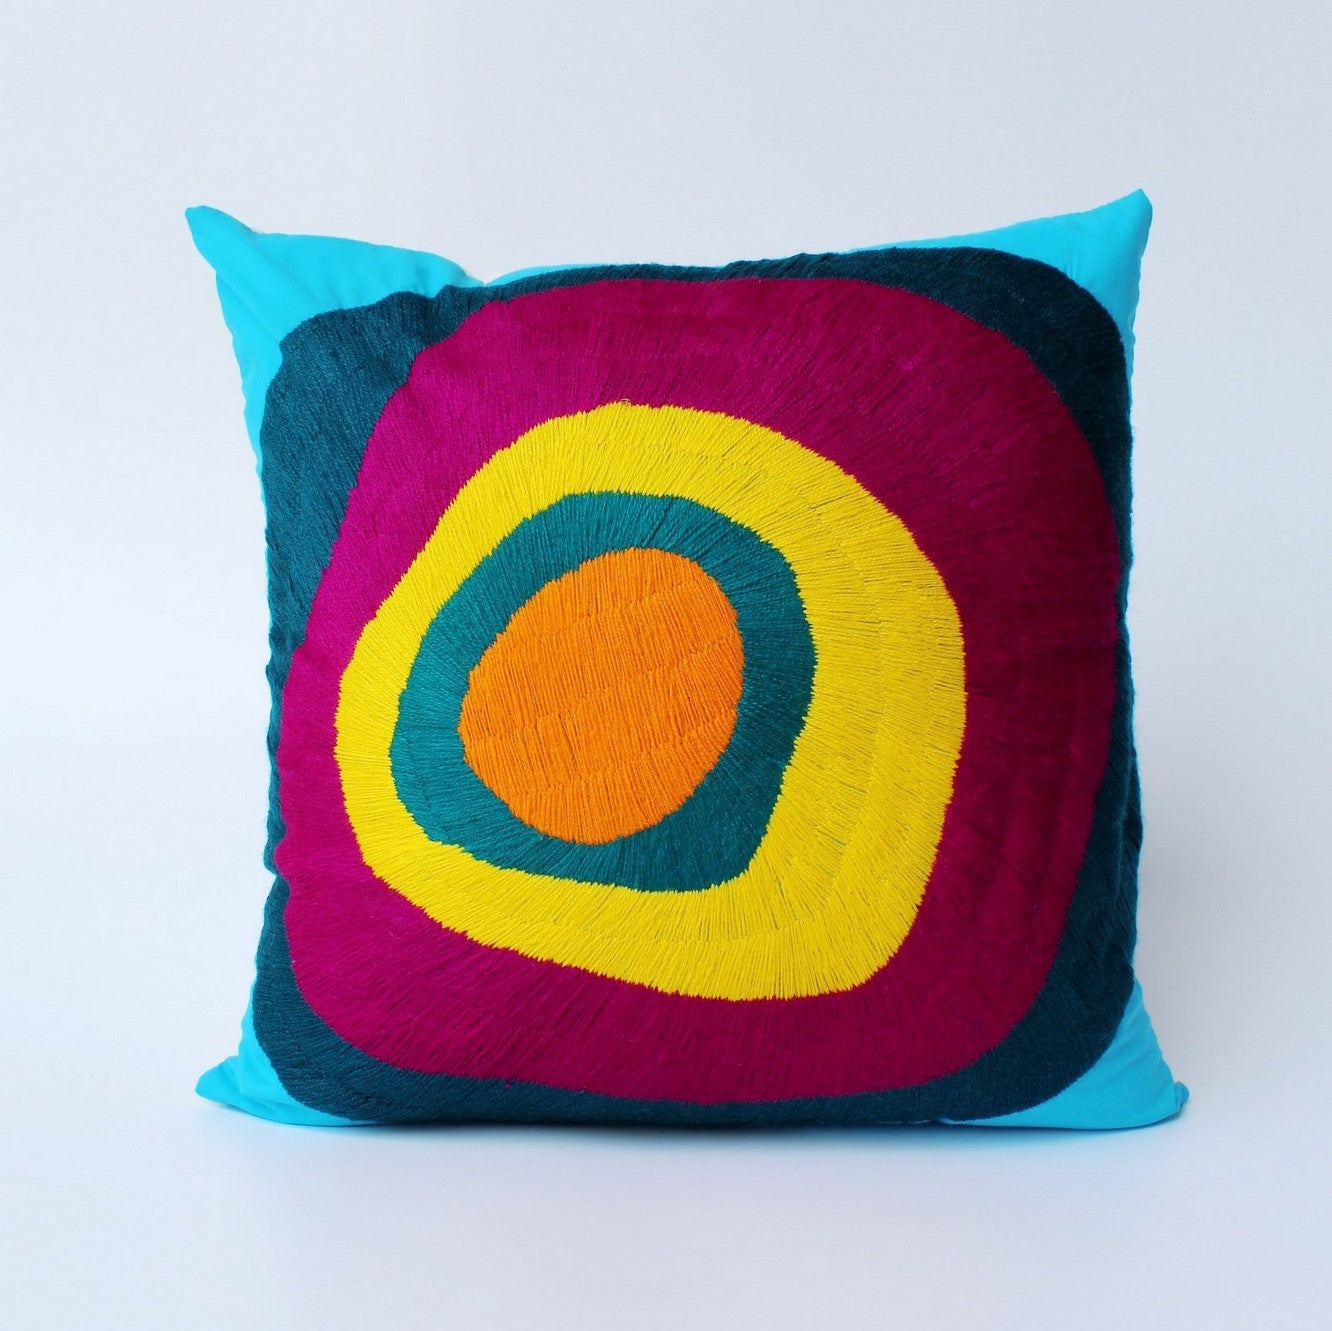 Embroidered pillow cover 16"x16" - Circles BLUE